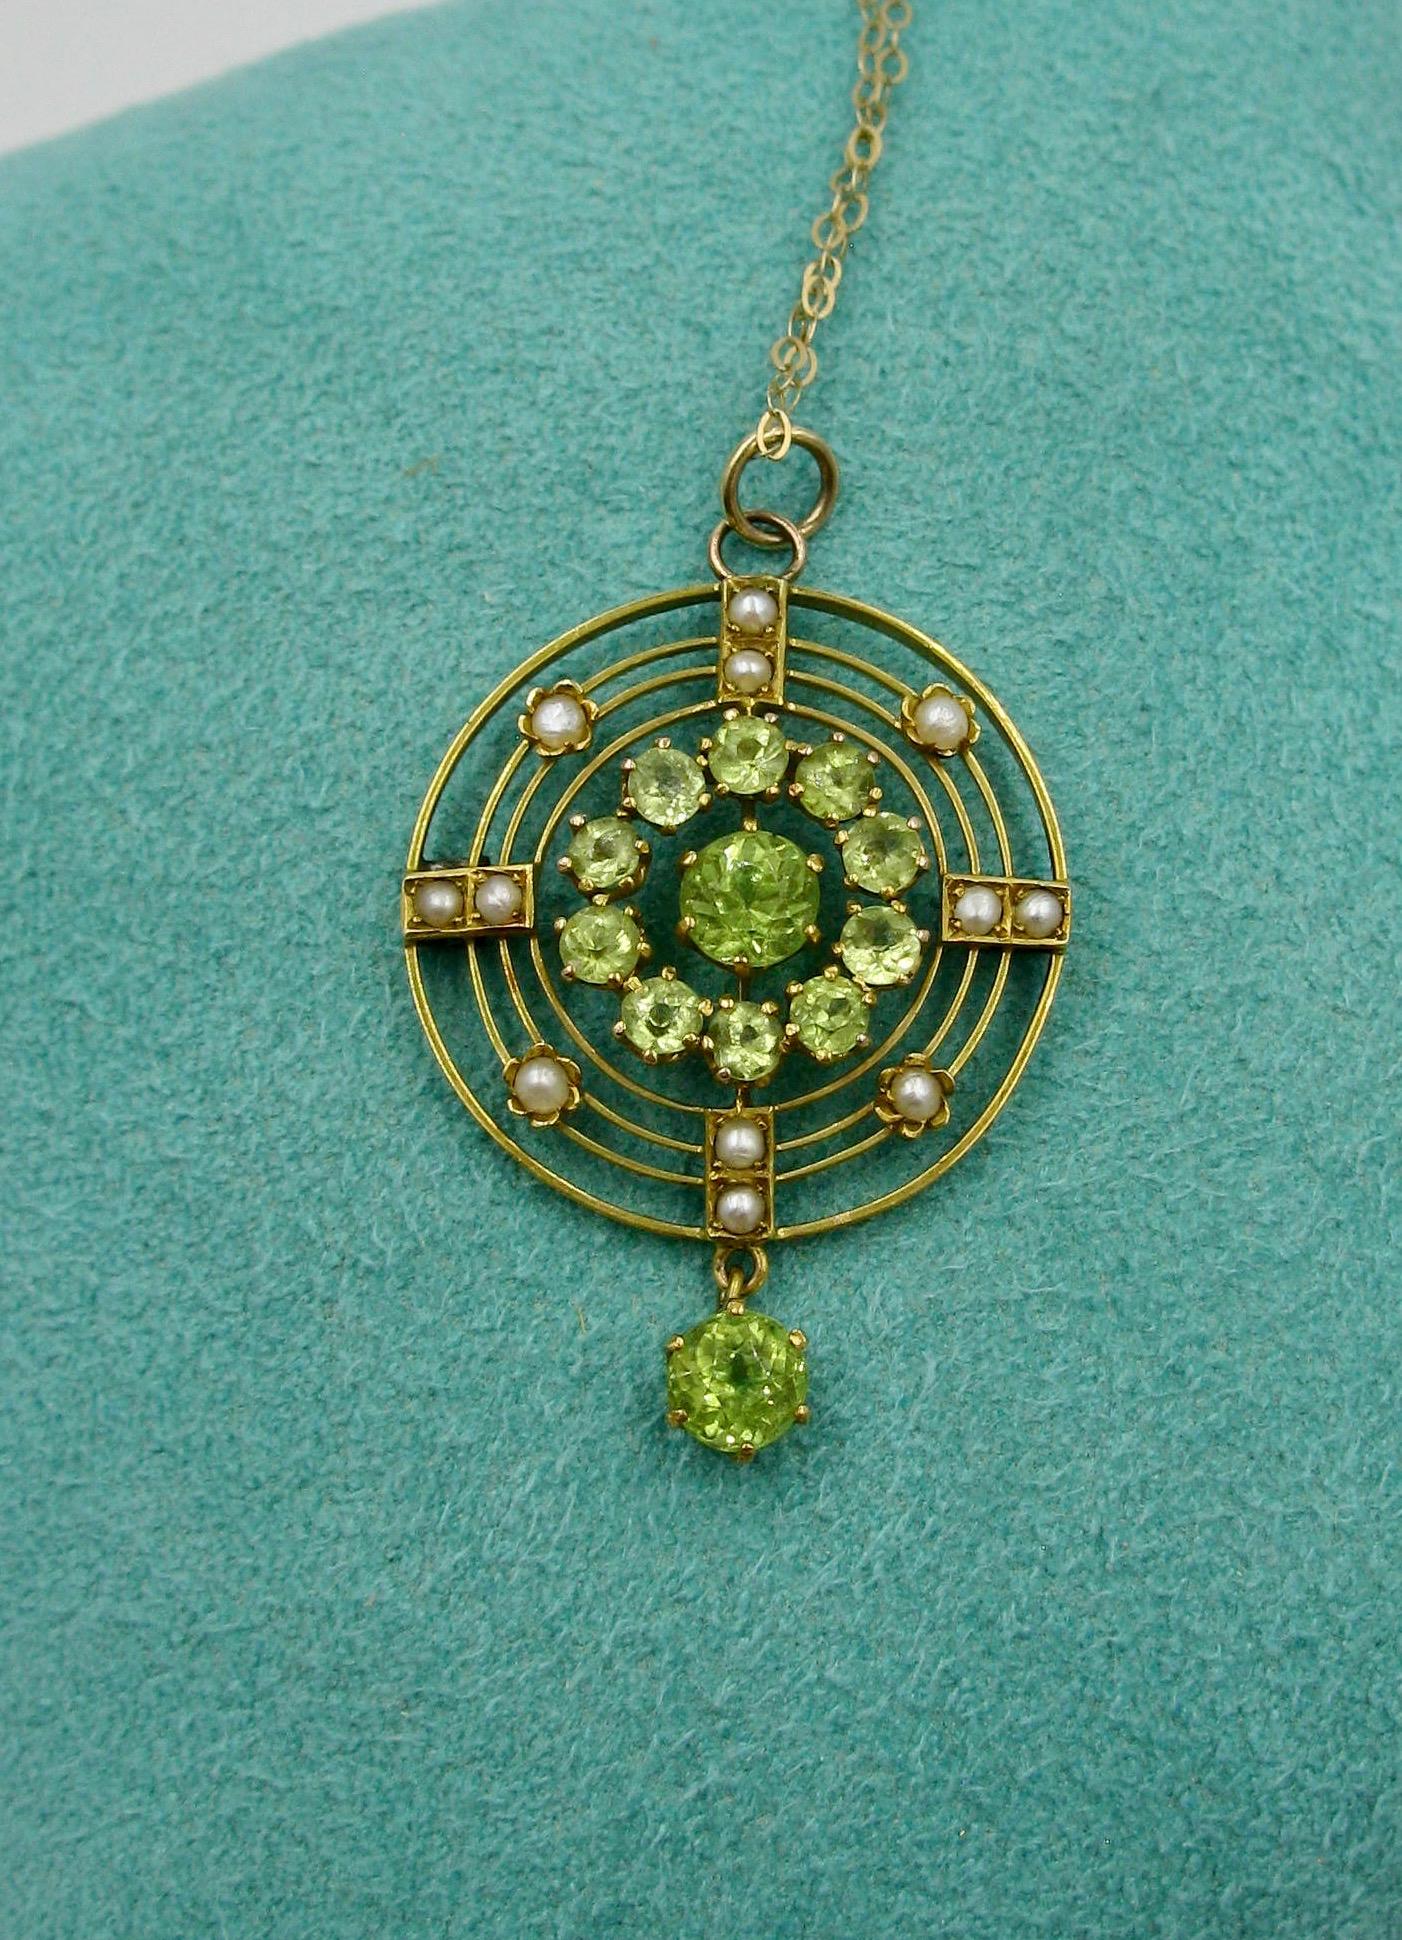 A stunning antique Victorian - Edwardian Peridot and Pearl Lavaliere Pendant Necklace.  The gorgeous pendant in a circular design is set with 12 sparkling round faceted Peridot gems.  The central Peridot is approximately 1/2 Carat.  The wonderful